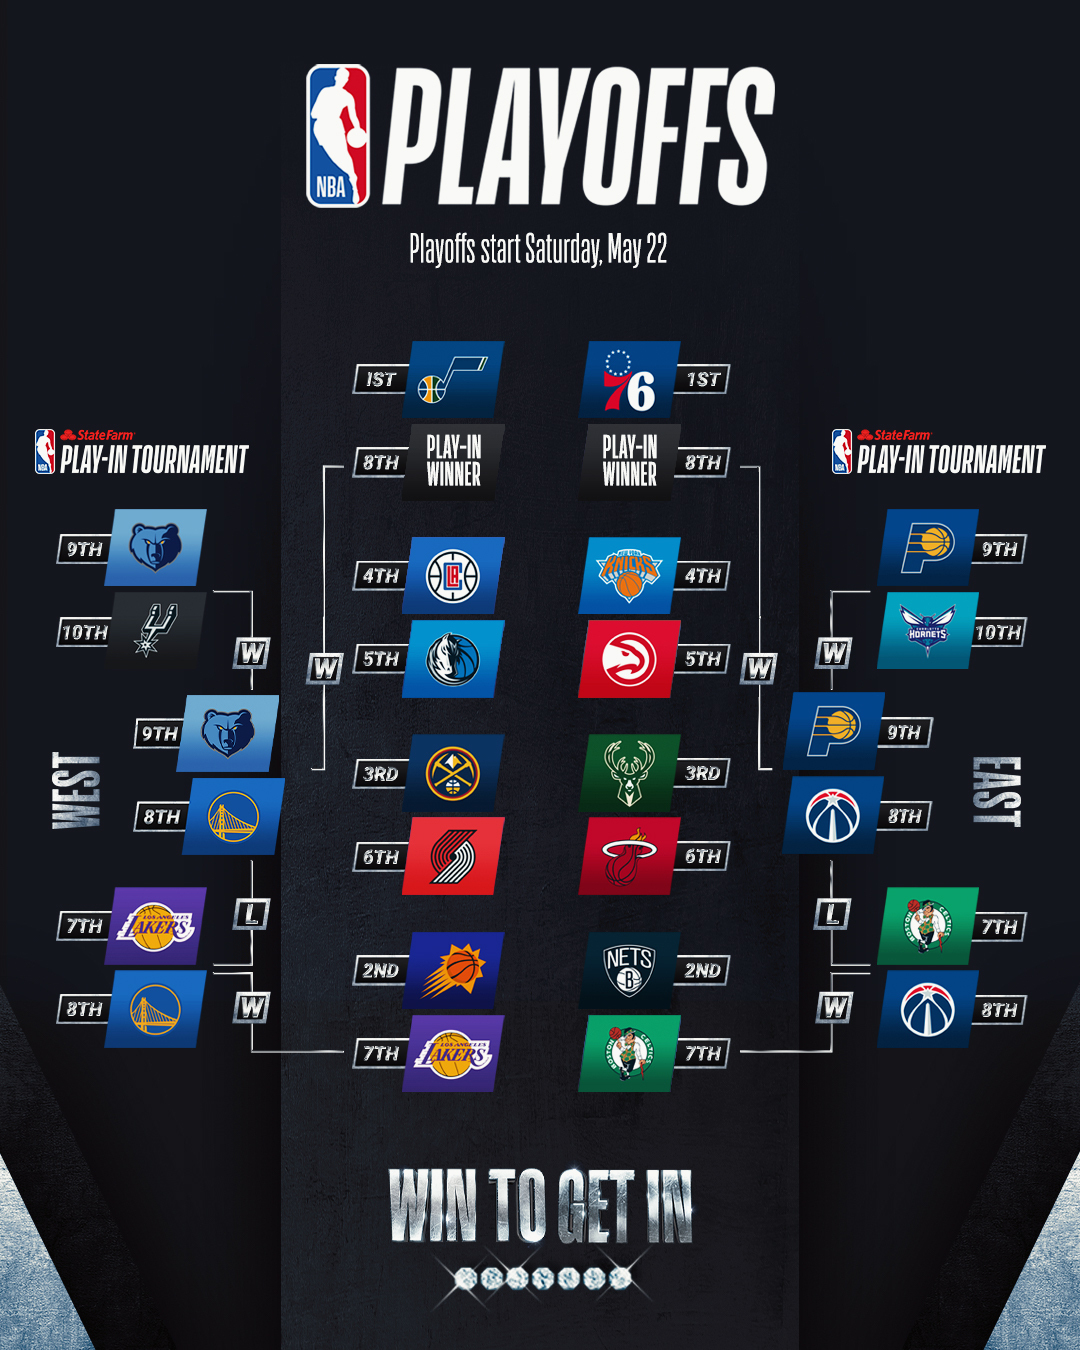 View Tournament Nba Finals Bracket 2021 Gif All in Here